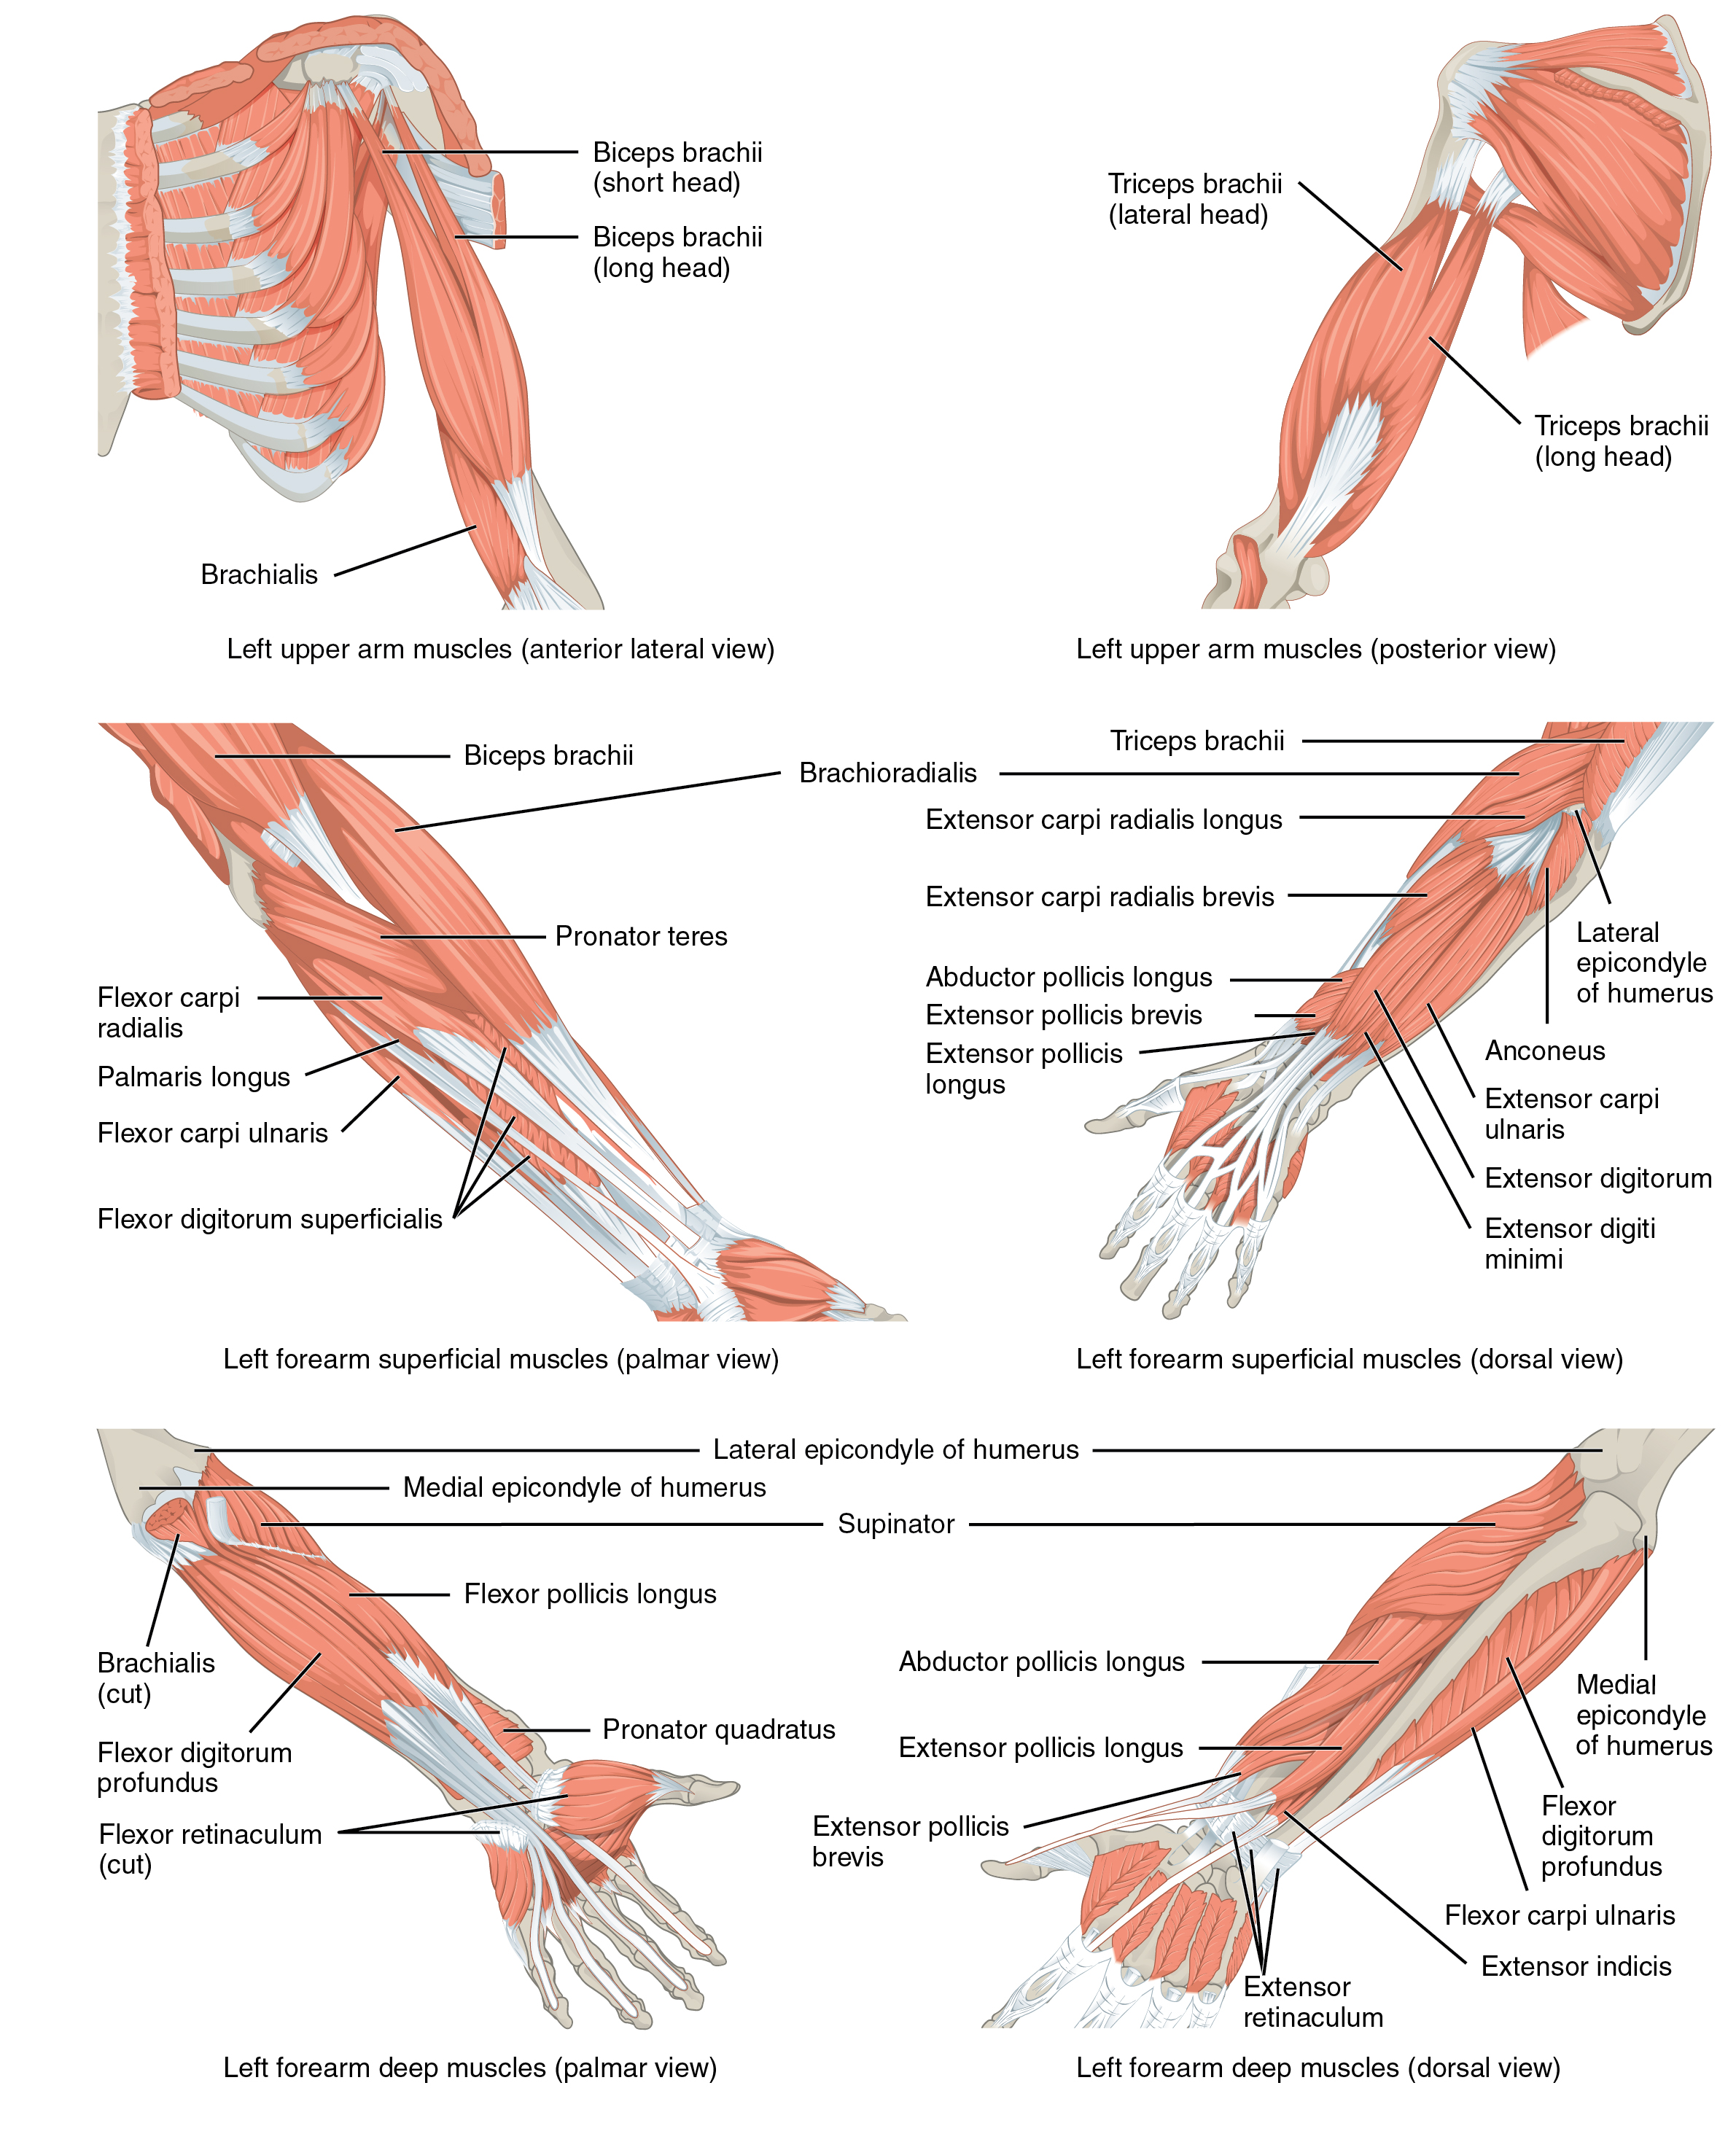 This multipart figure shows the different muscles that move the forearm. The major muscle groups are labeled.